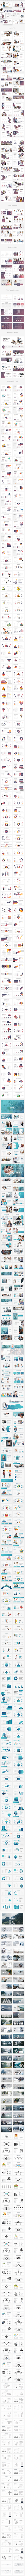 Operating Pitch Deck 3 in 1 Bundle Keynote Template